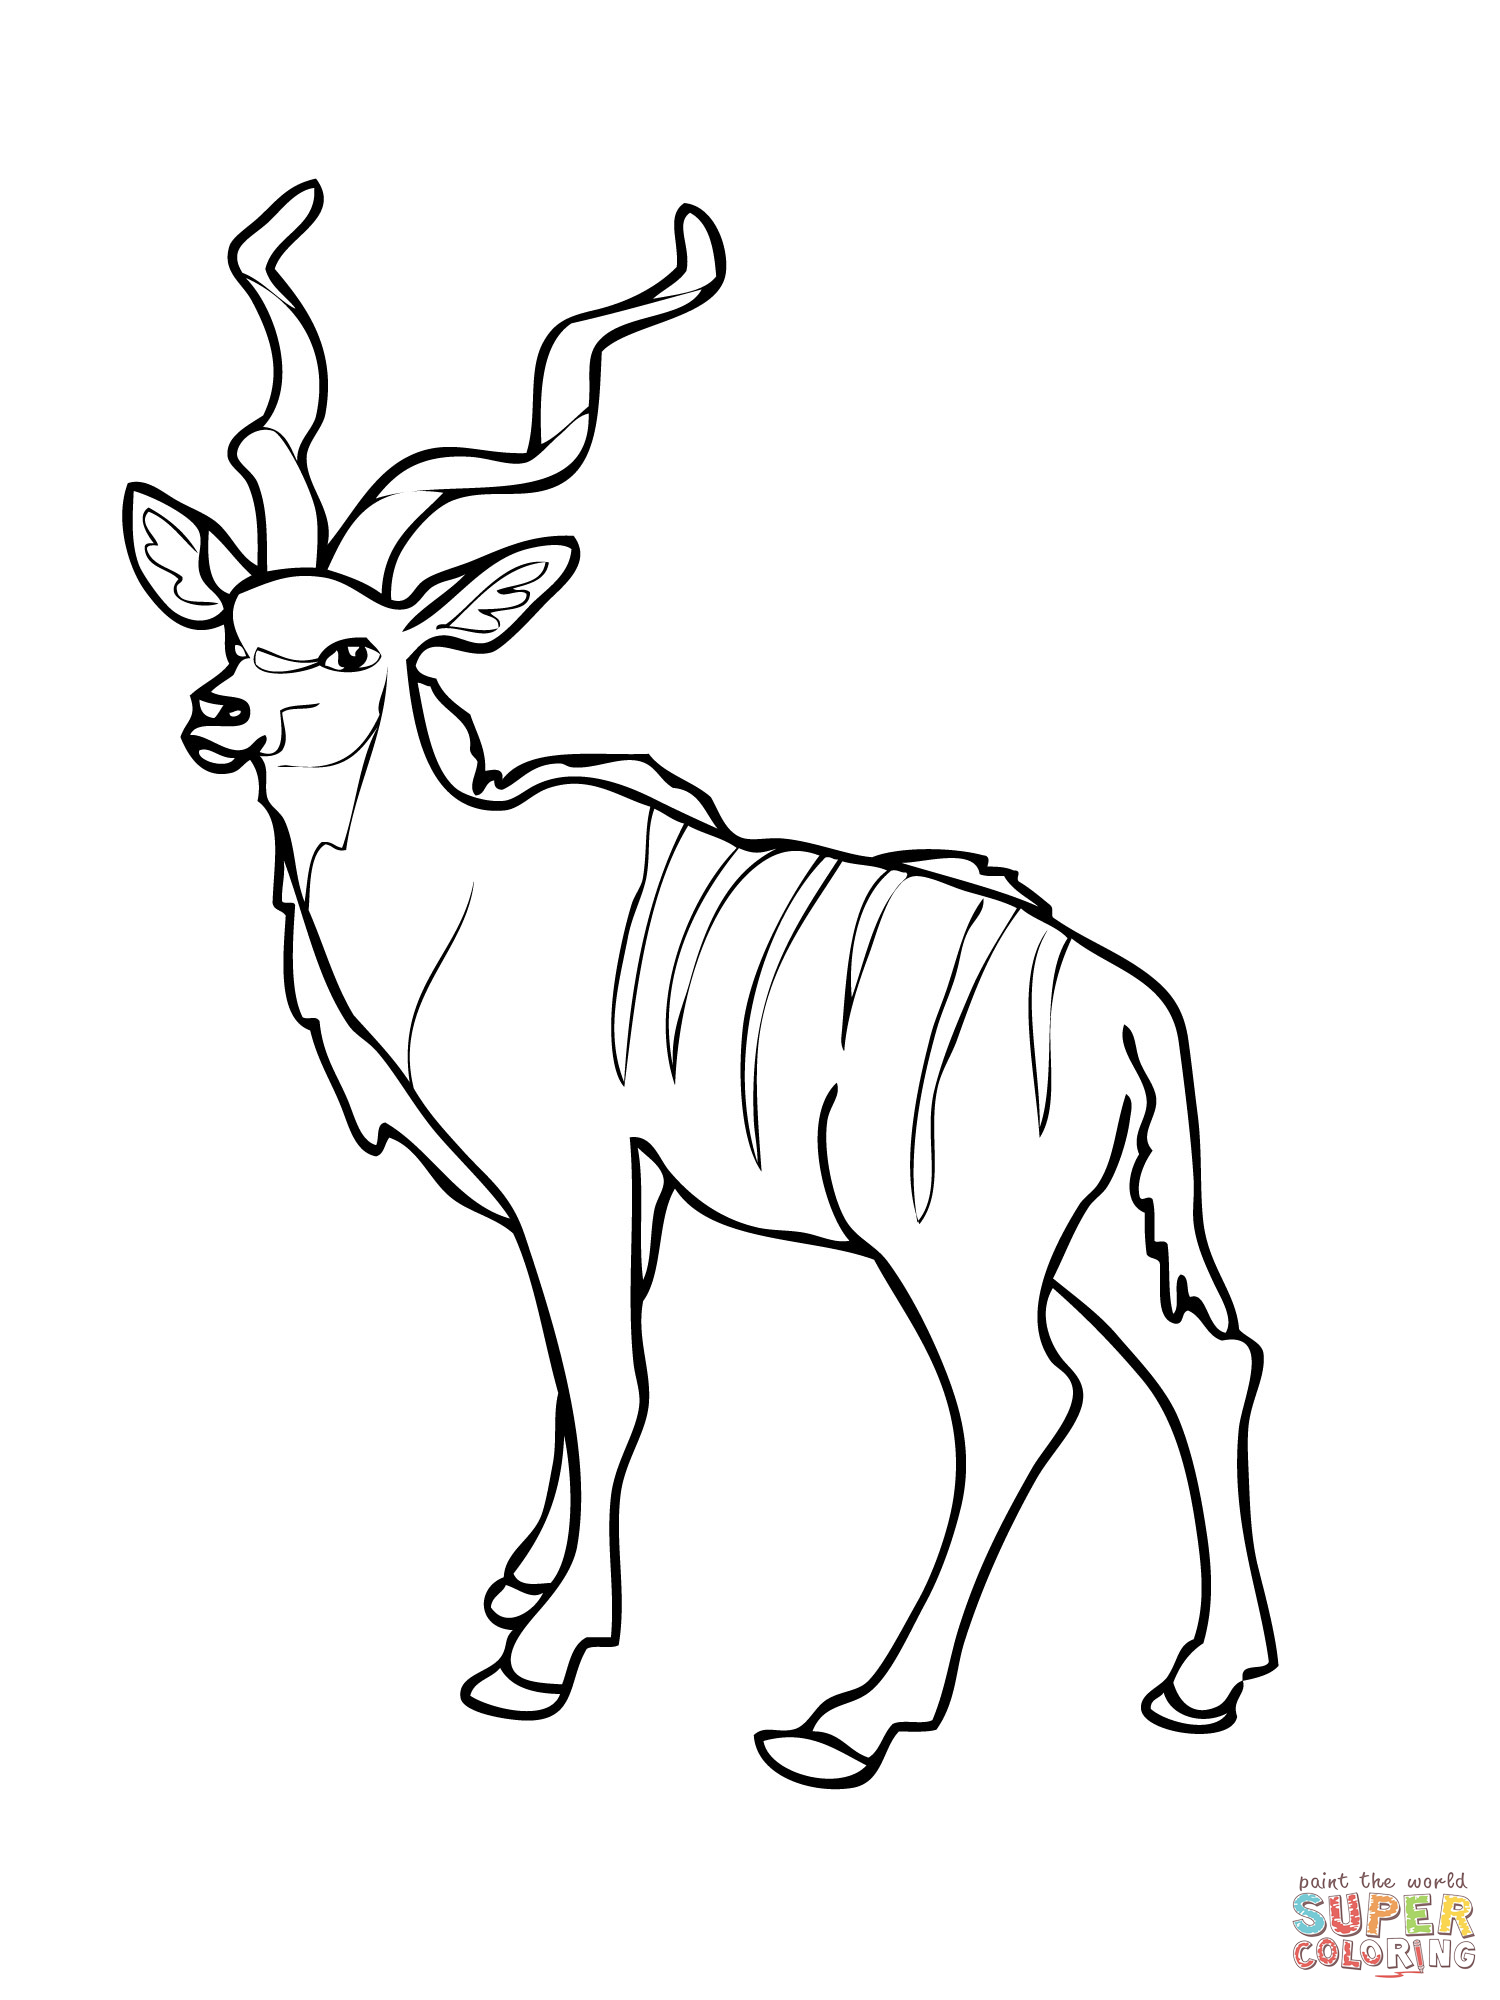 Pronghorn Antelope coloring, Download Pronghorn Antelope coloring for